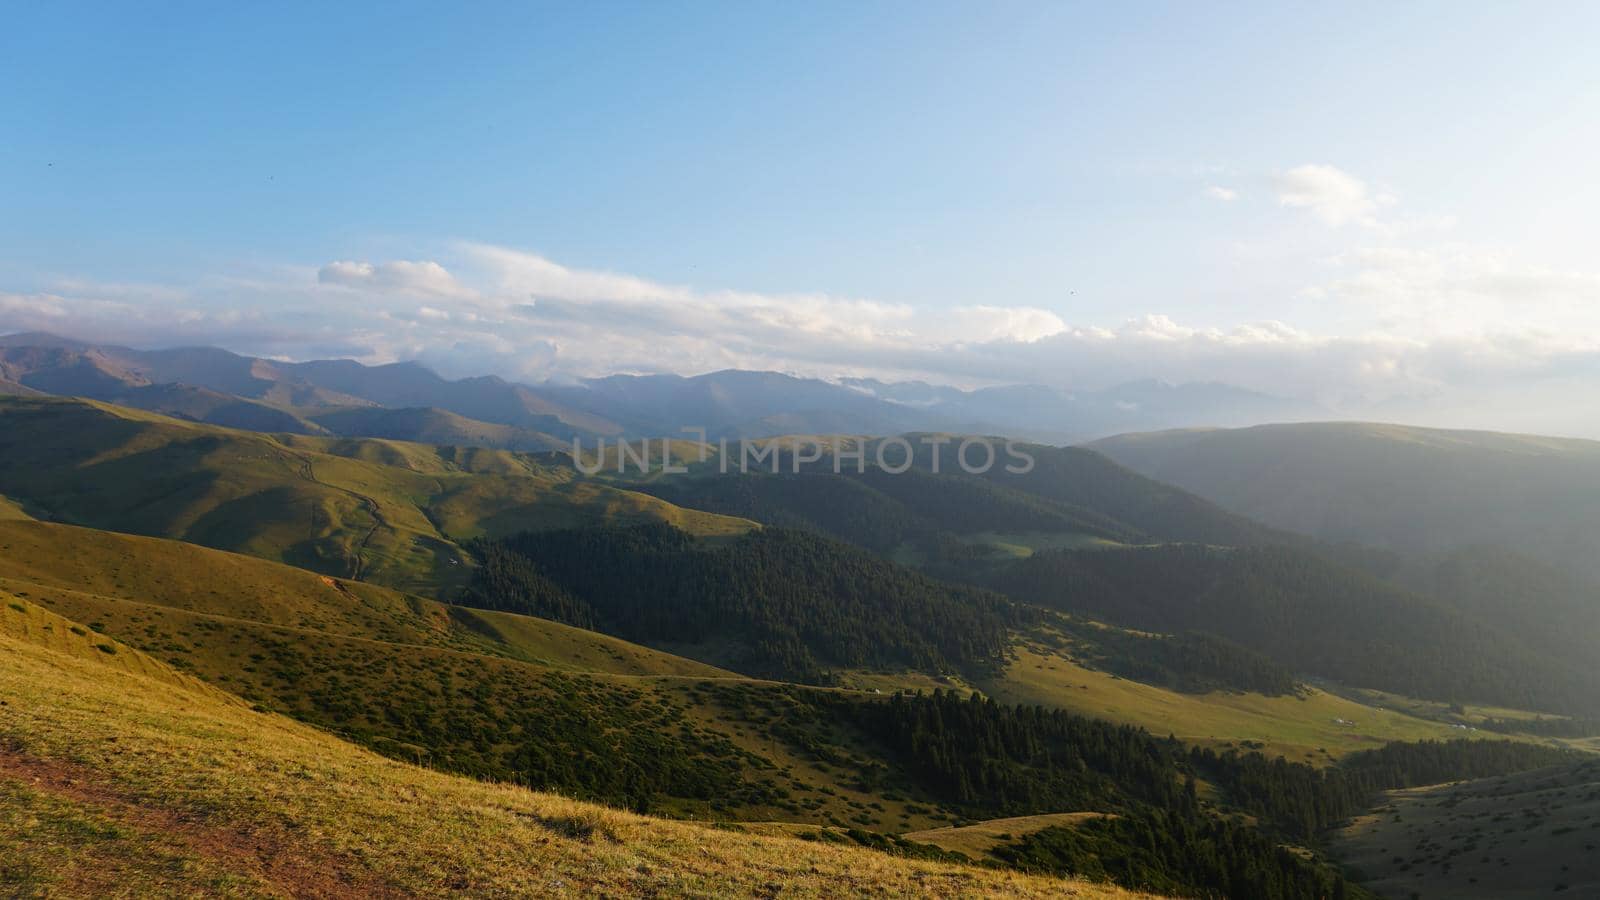 Big white clouds over green hills and mountains. Yellow-green grass covers the mountains, tall green coniferous trees in the gorge. Low bushes grow. A light haze floats on the ground. Assy, Kazakhstan